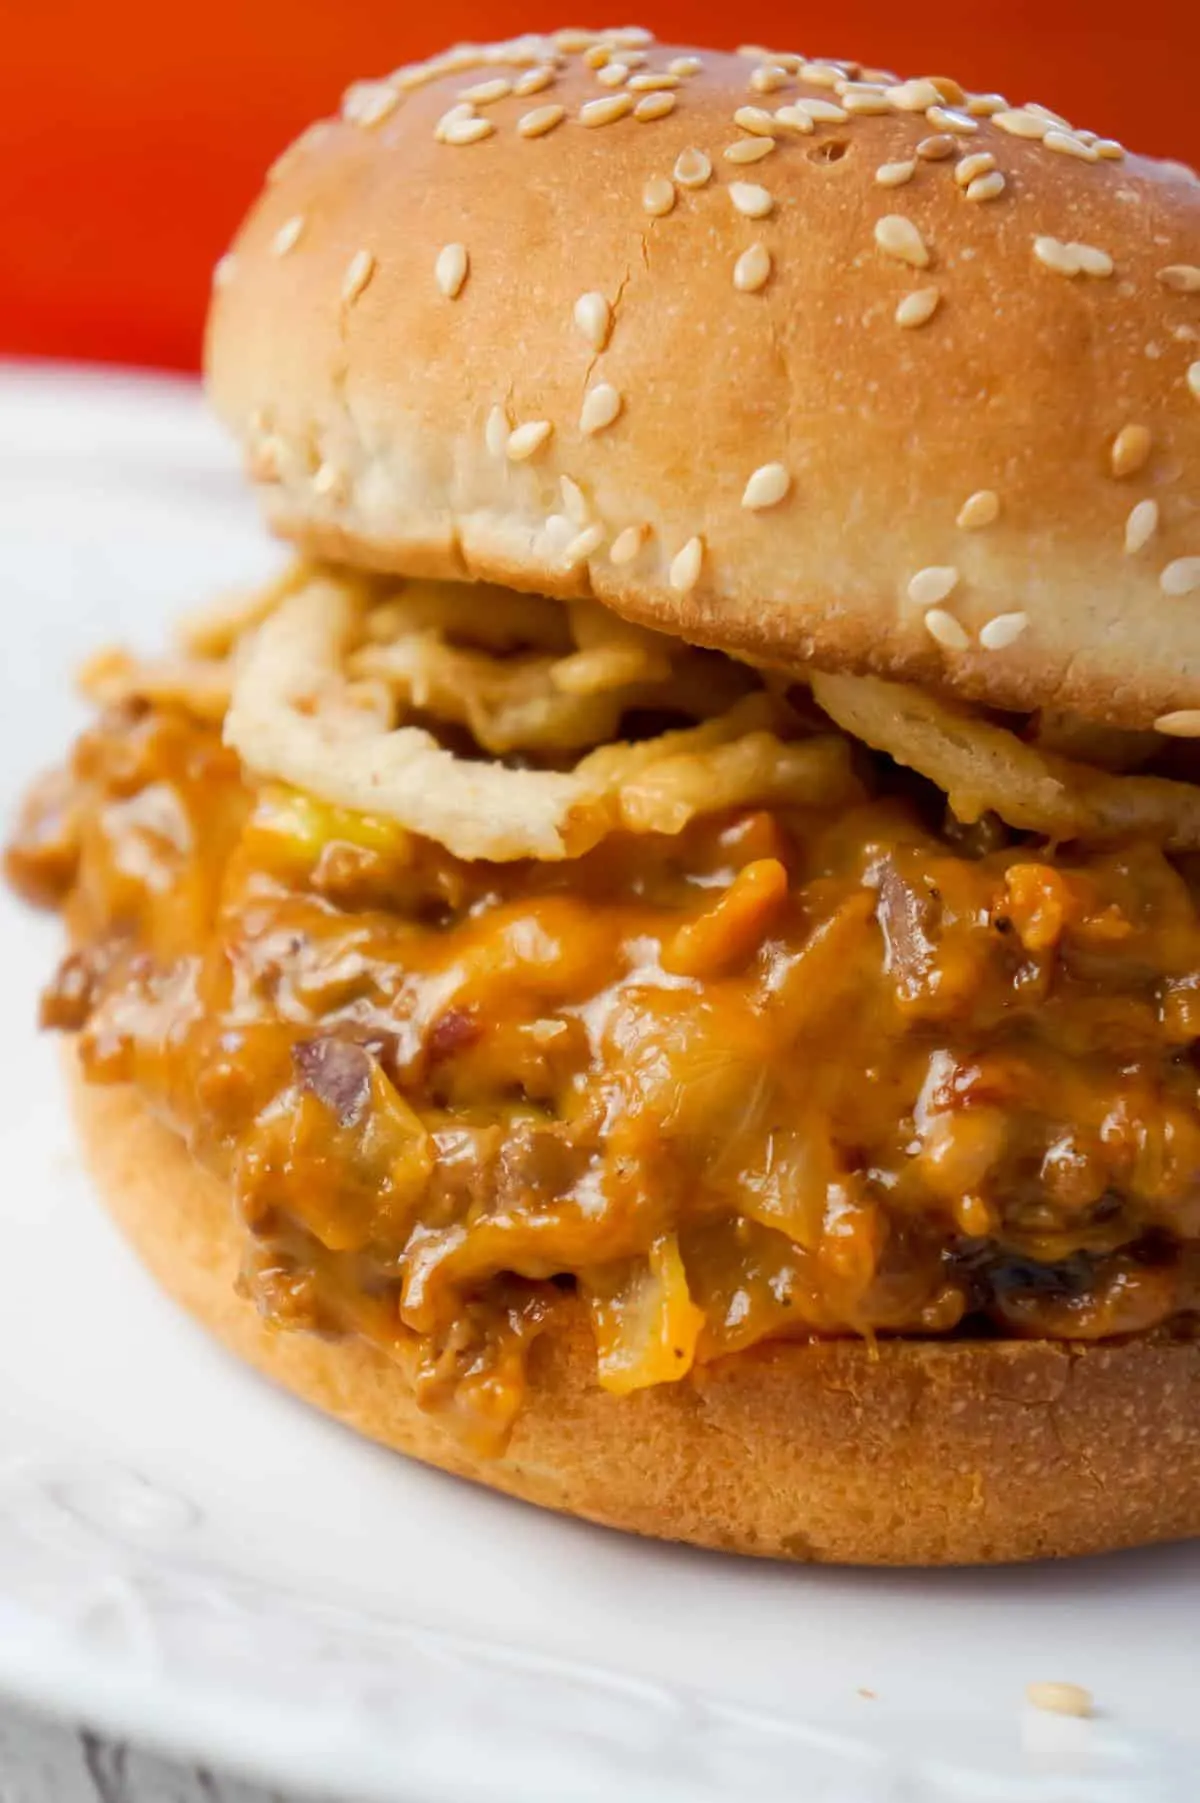 BBQ Bacon Cheeseburger Sloppy Joes are a delicious ground beef dinner loaded with crumbled bacon, BBQ sauce, salsa con queso and cheddar cheese.